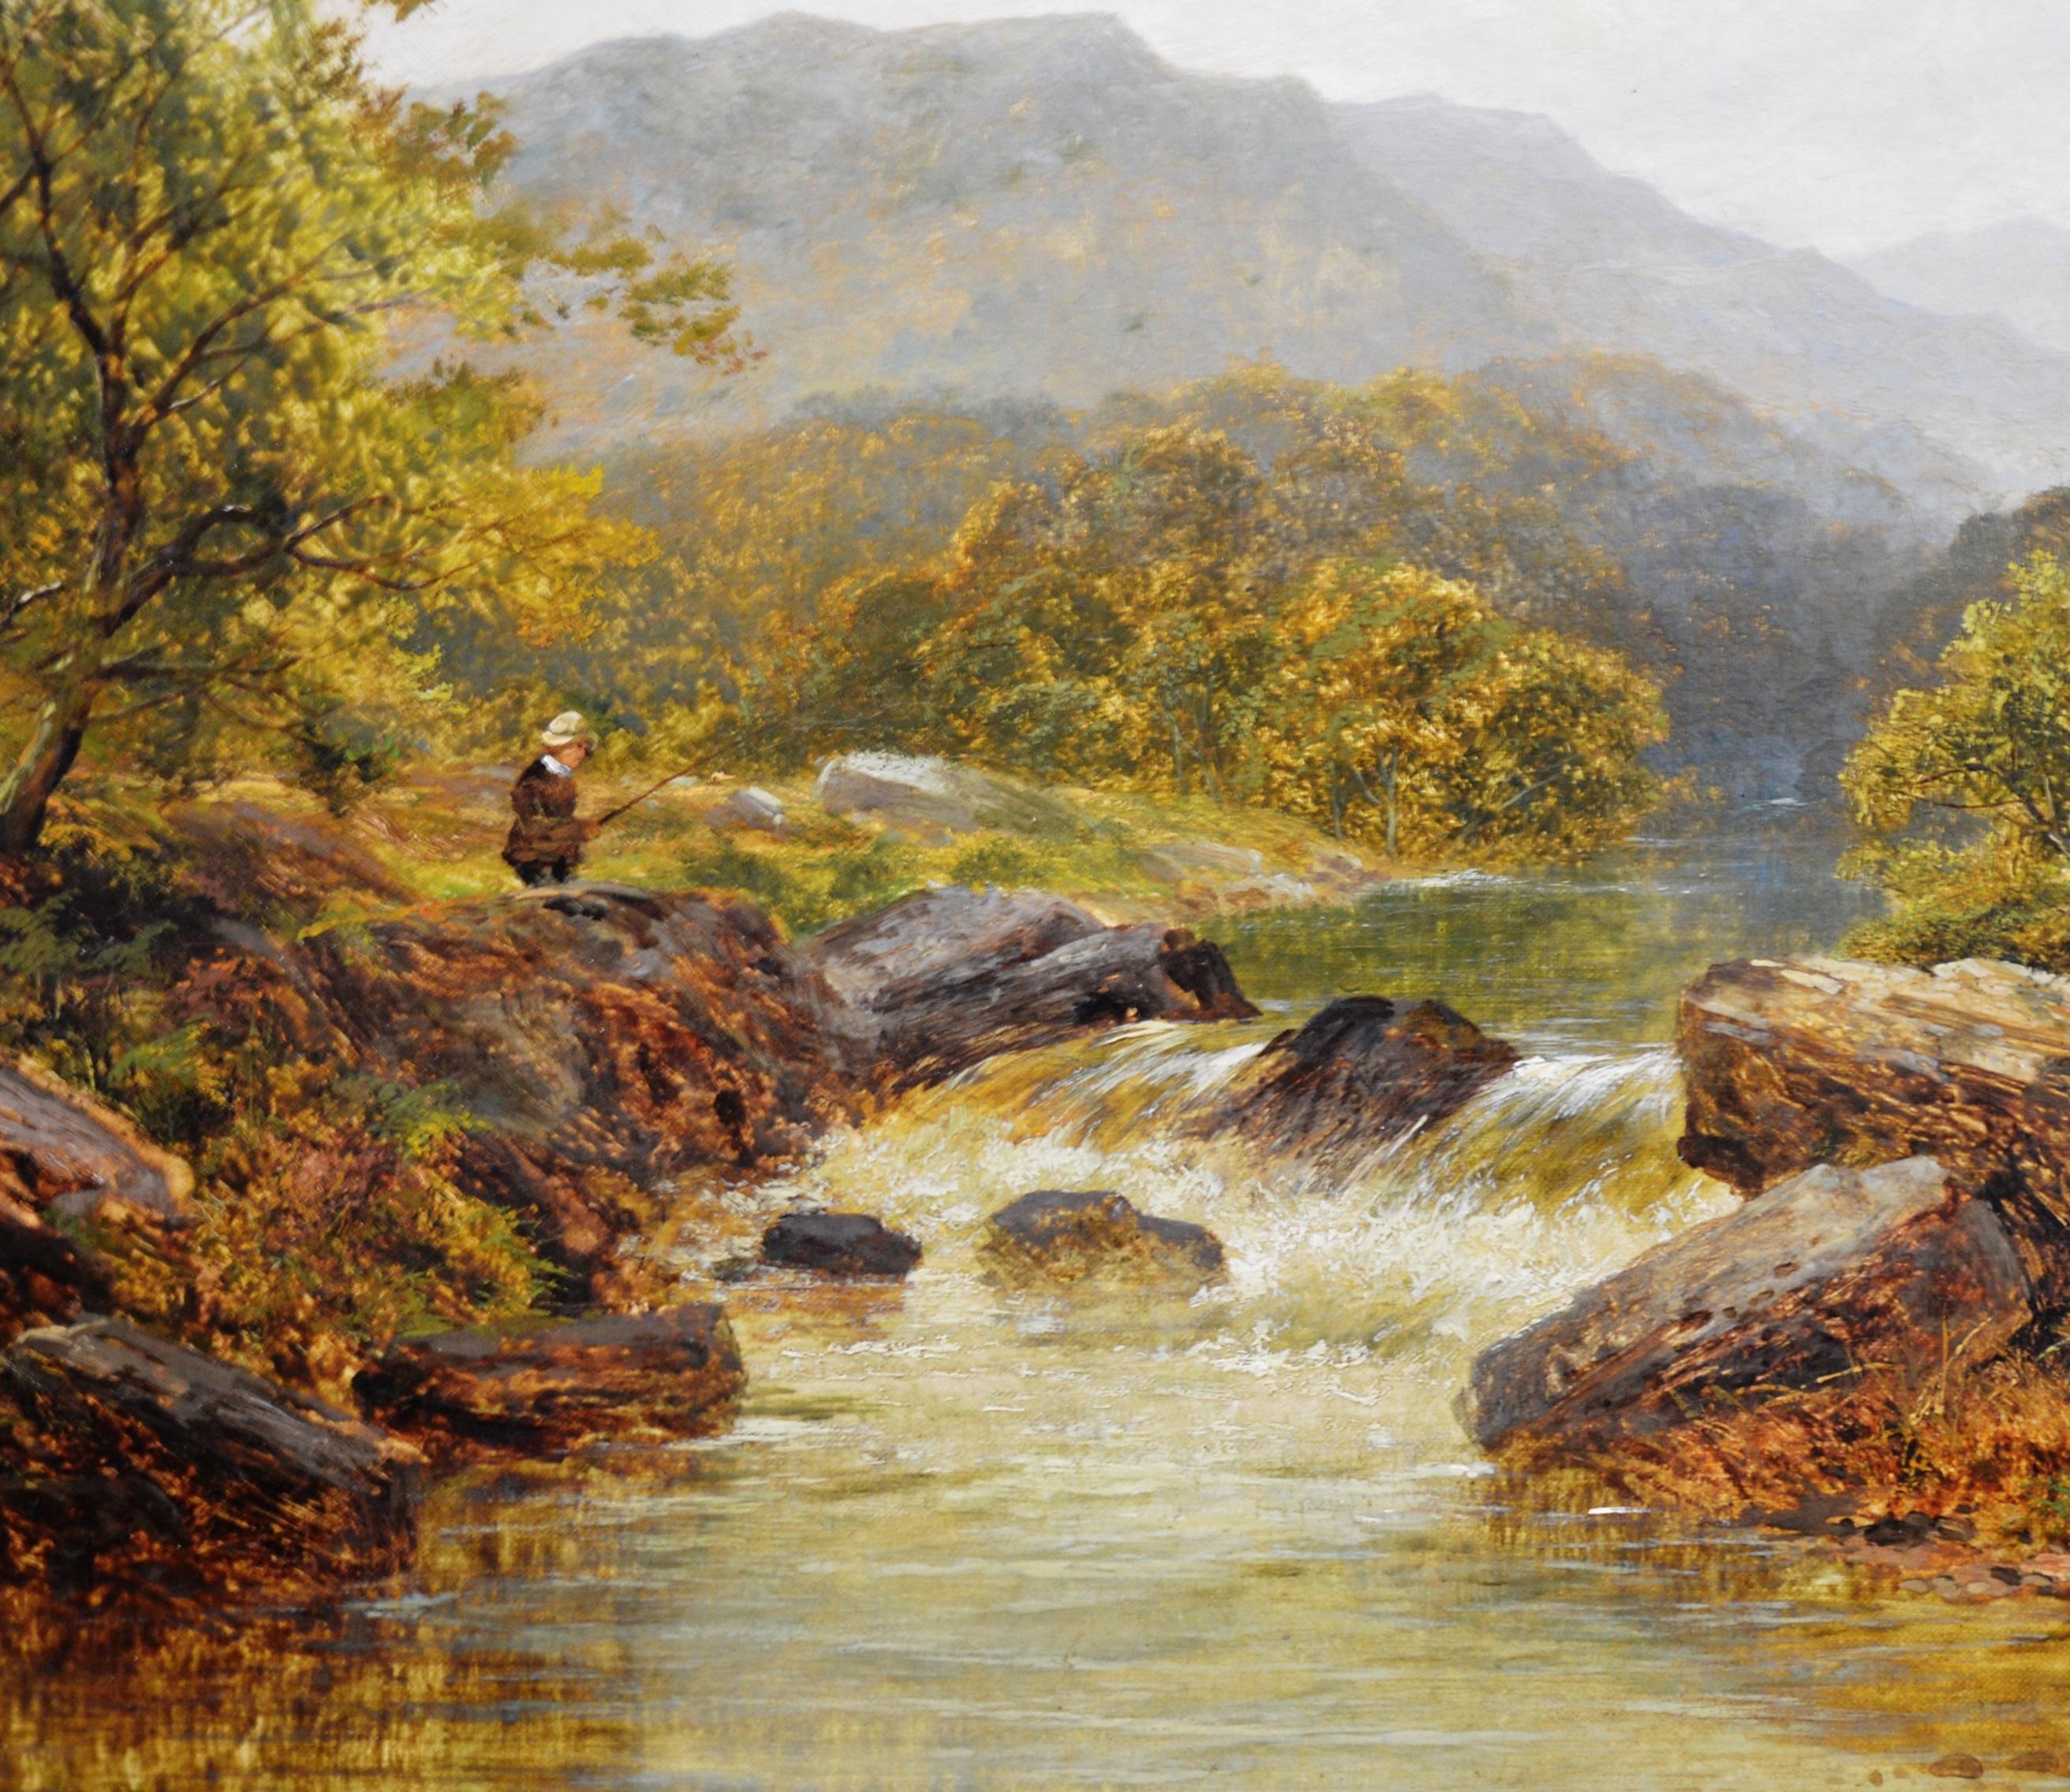 This is a fine large 19th century landscape oil painting depicting an angler ‘Fishing in the Highlands’ of Scotland by the listed British landscape painter Charles Leaver Shaw (1853-1932). The painting is signed by the artist and hangs in a newly